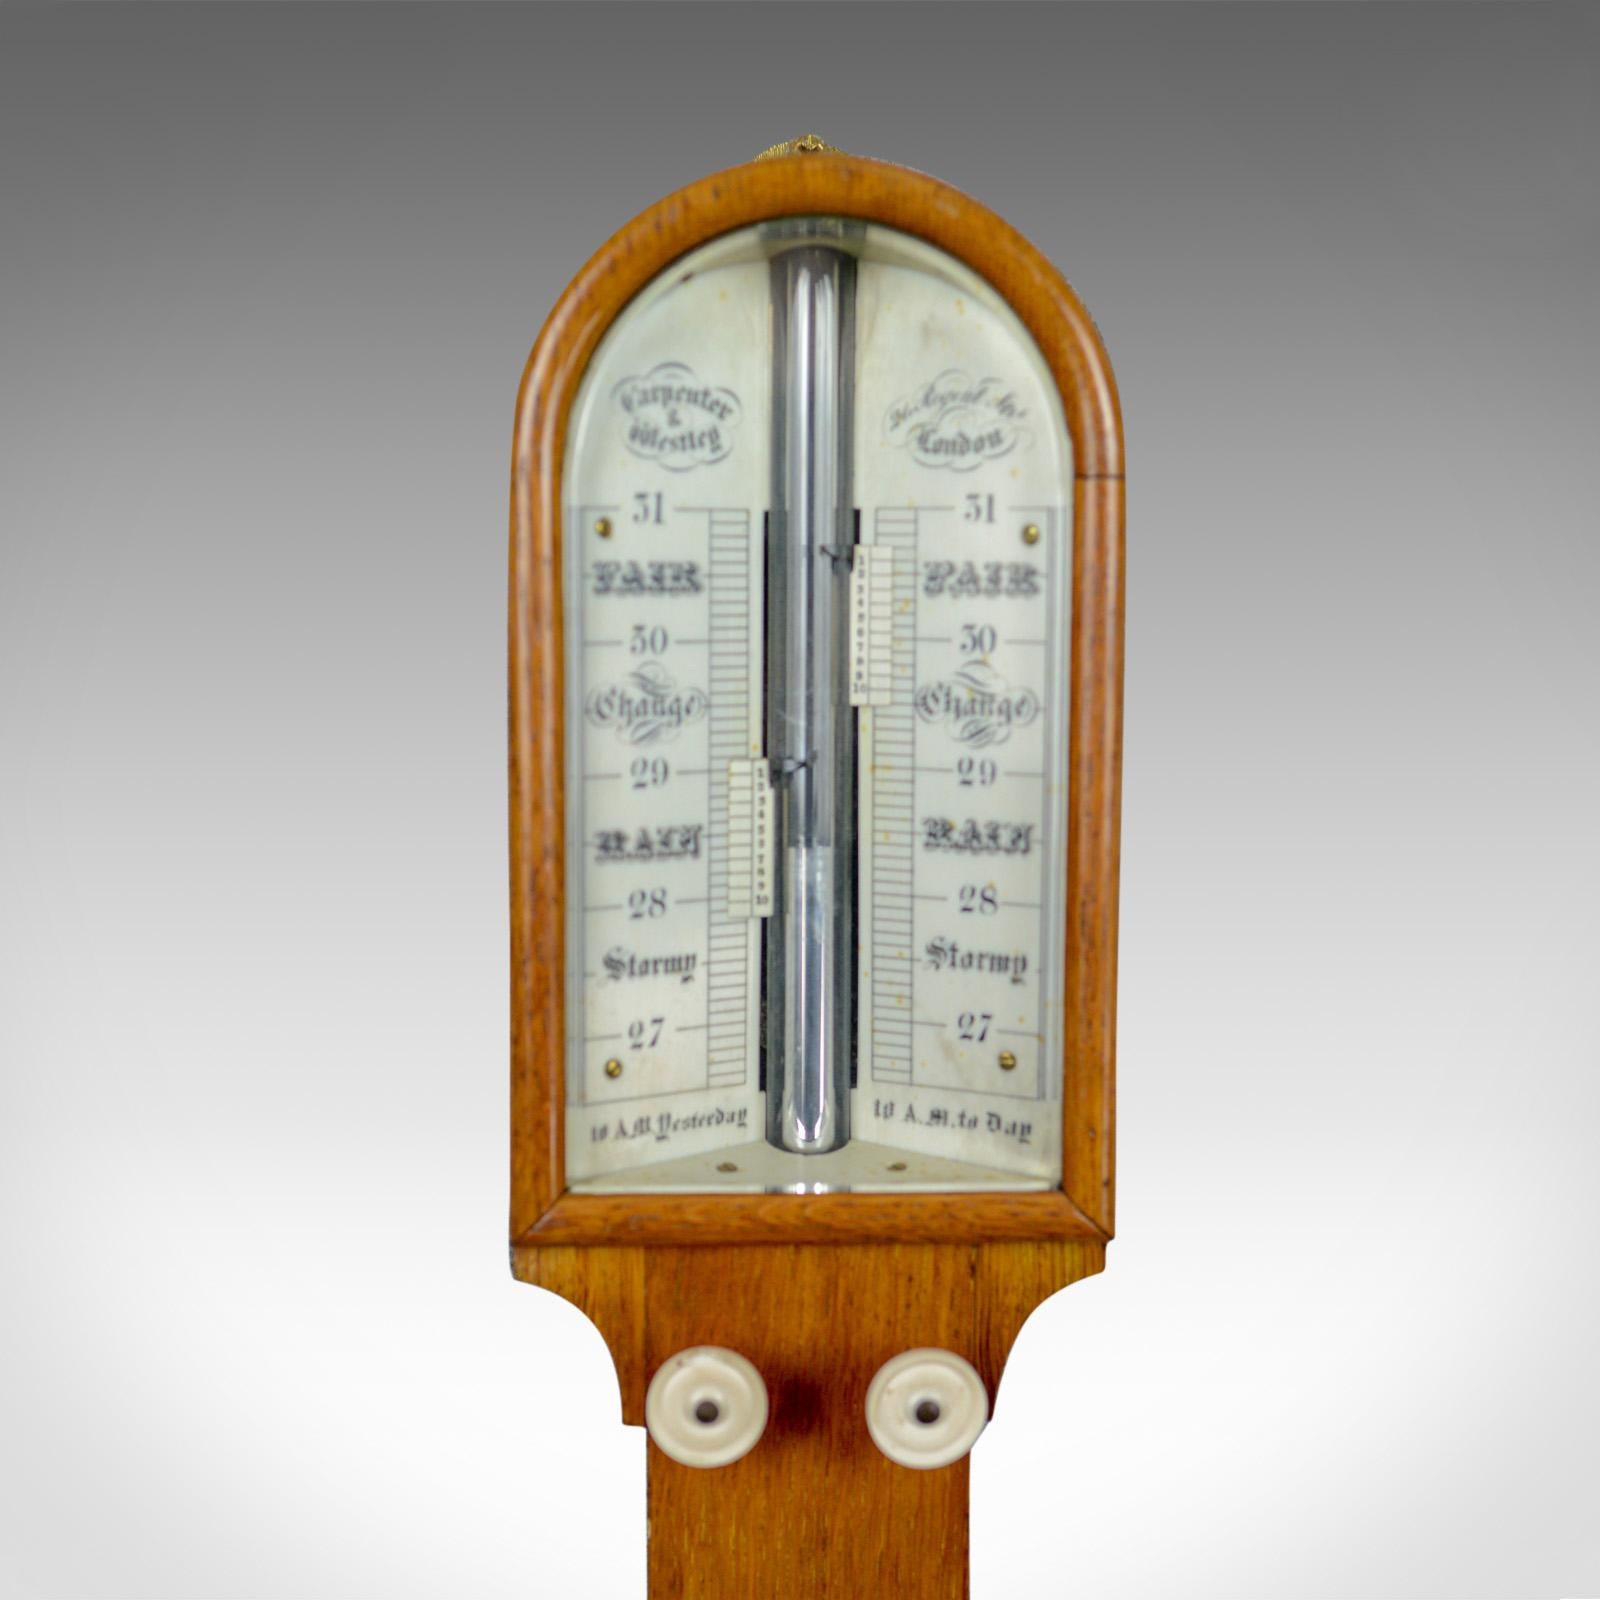 This is an antique stick barometer by Carpenter and Westley, 24 Regents Street, London. Dome topped, in oak and dating to the mid-19th century, circa 1860.

Of fine quality by renowned London maker, Carpenter and Westley
Cased in English oak